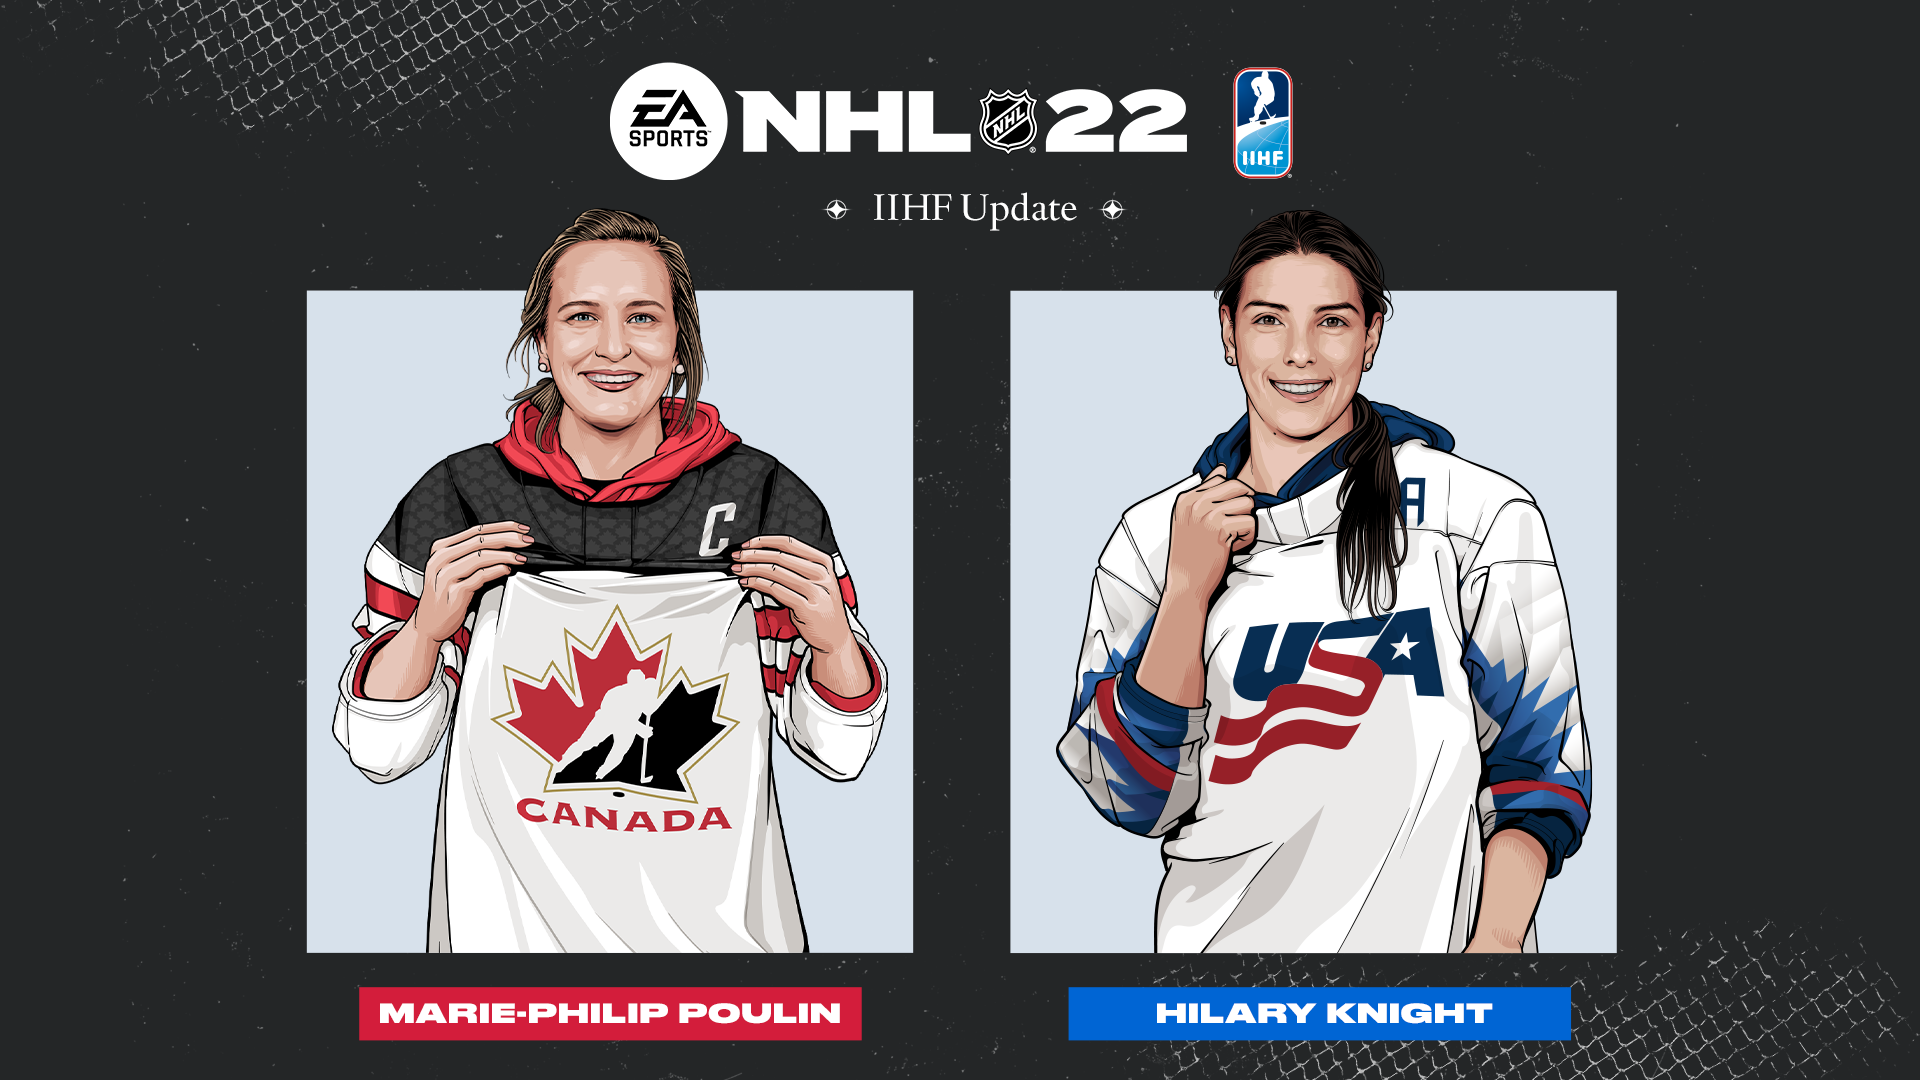 NHL 22 Adds New IIHF Content Today And Playable Womens Teams In 2022